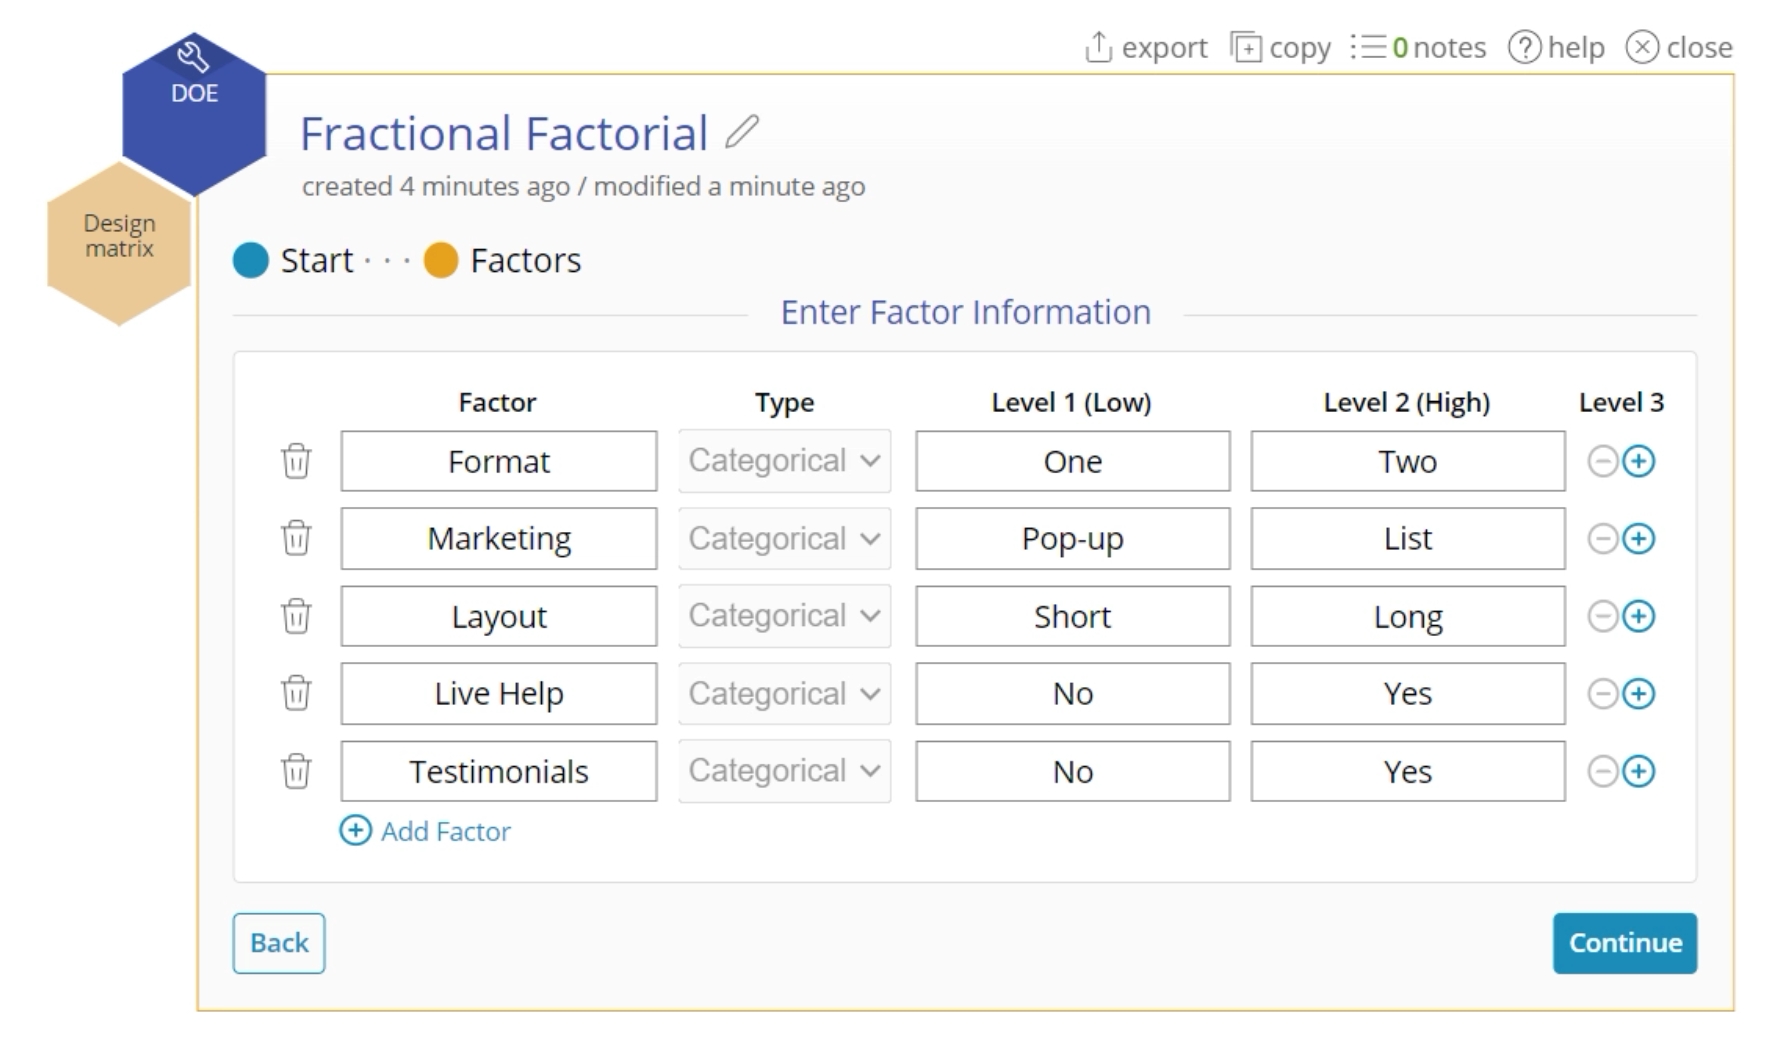 Factor selection interface displaying five factors, each with two levels.